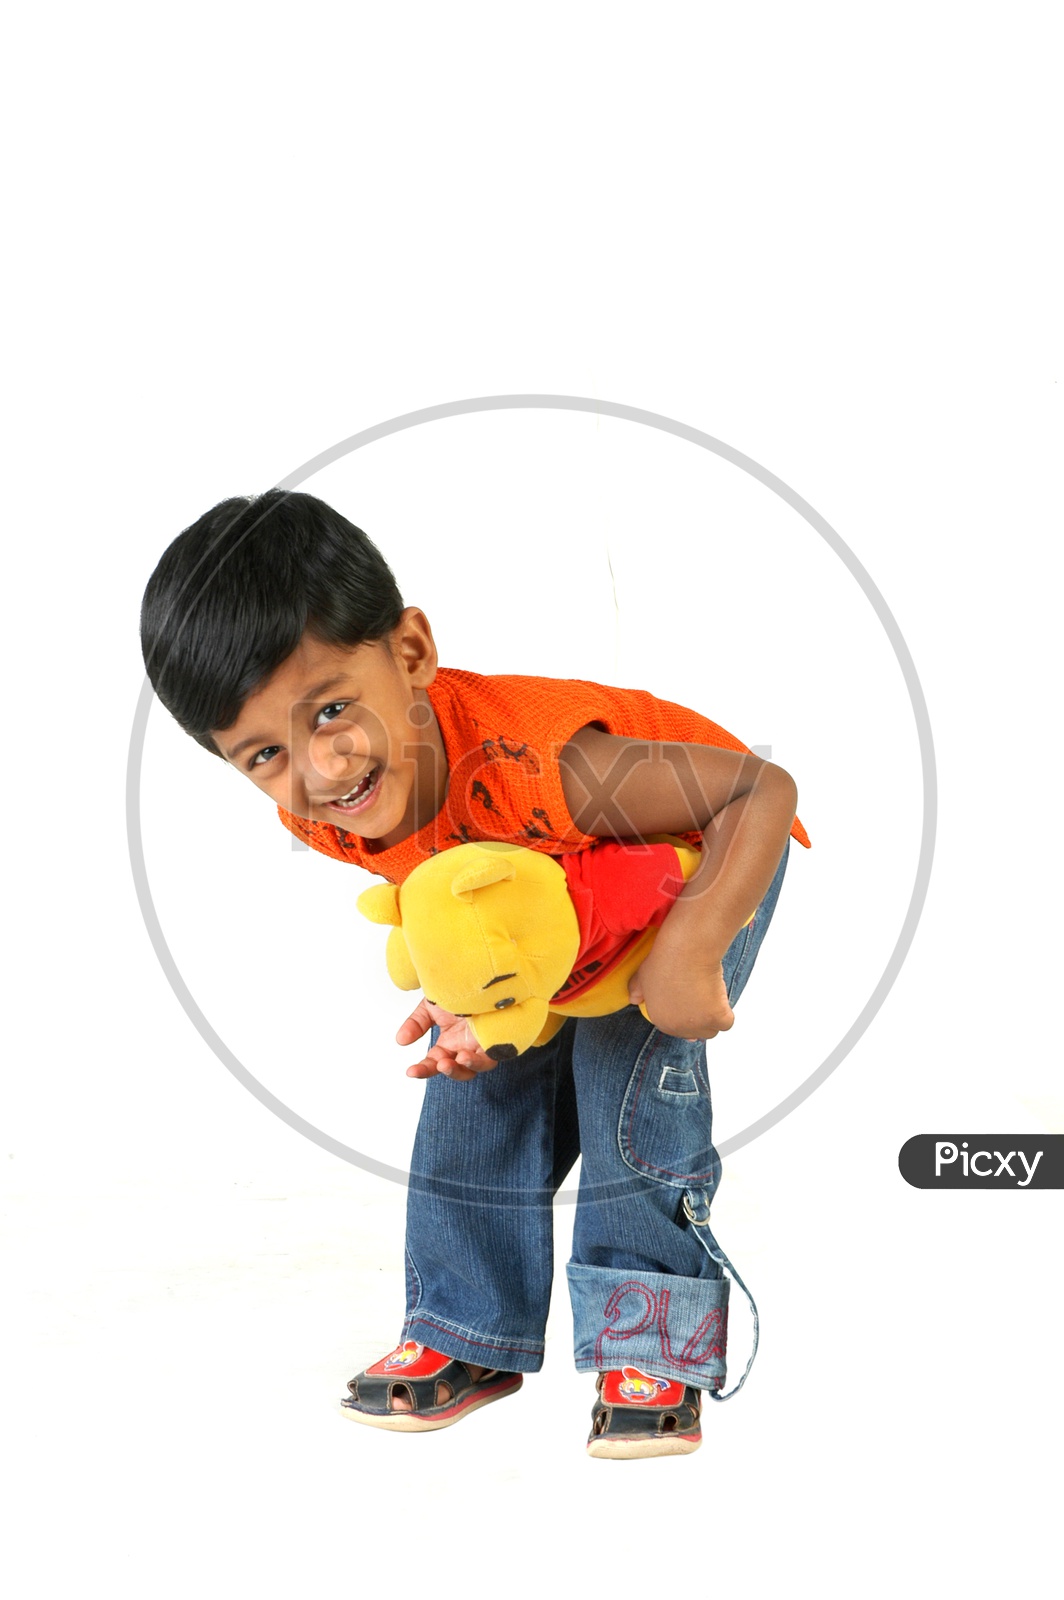 Indian boy holding a toy